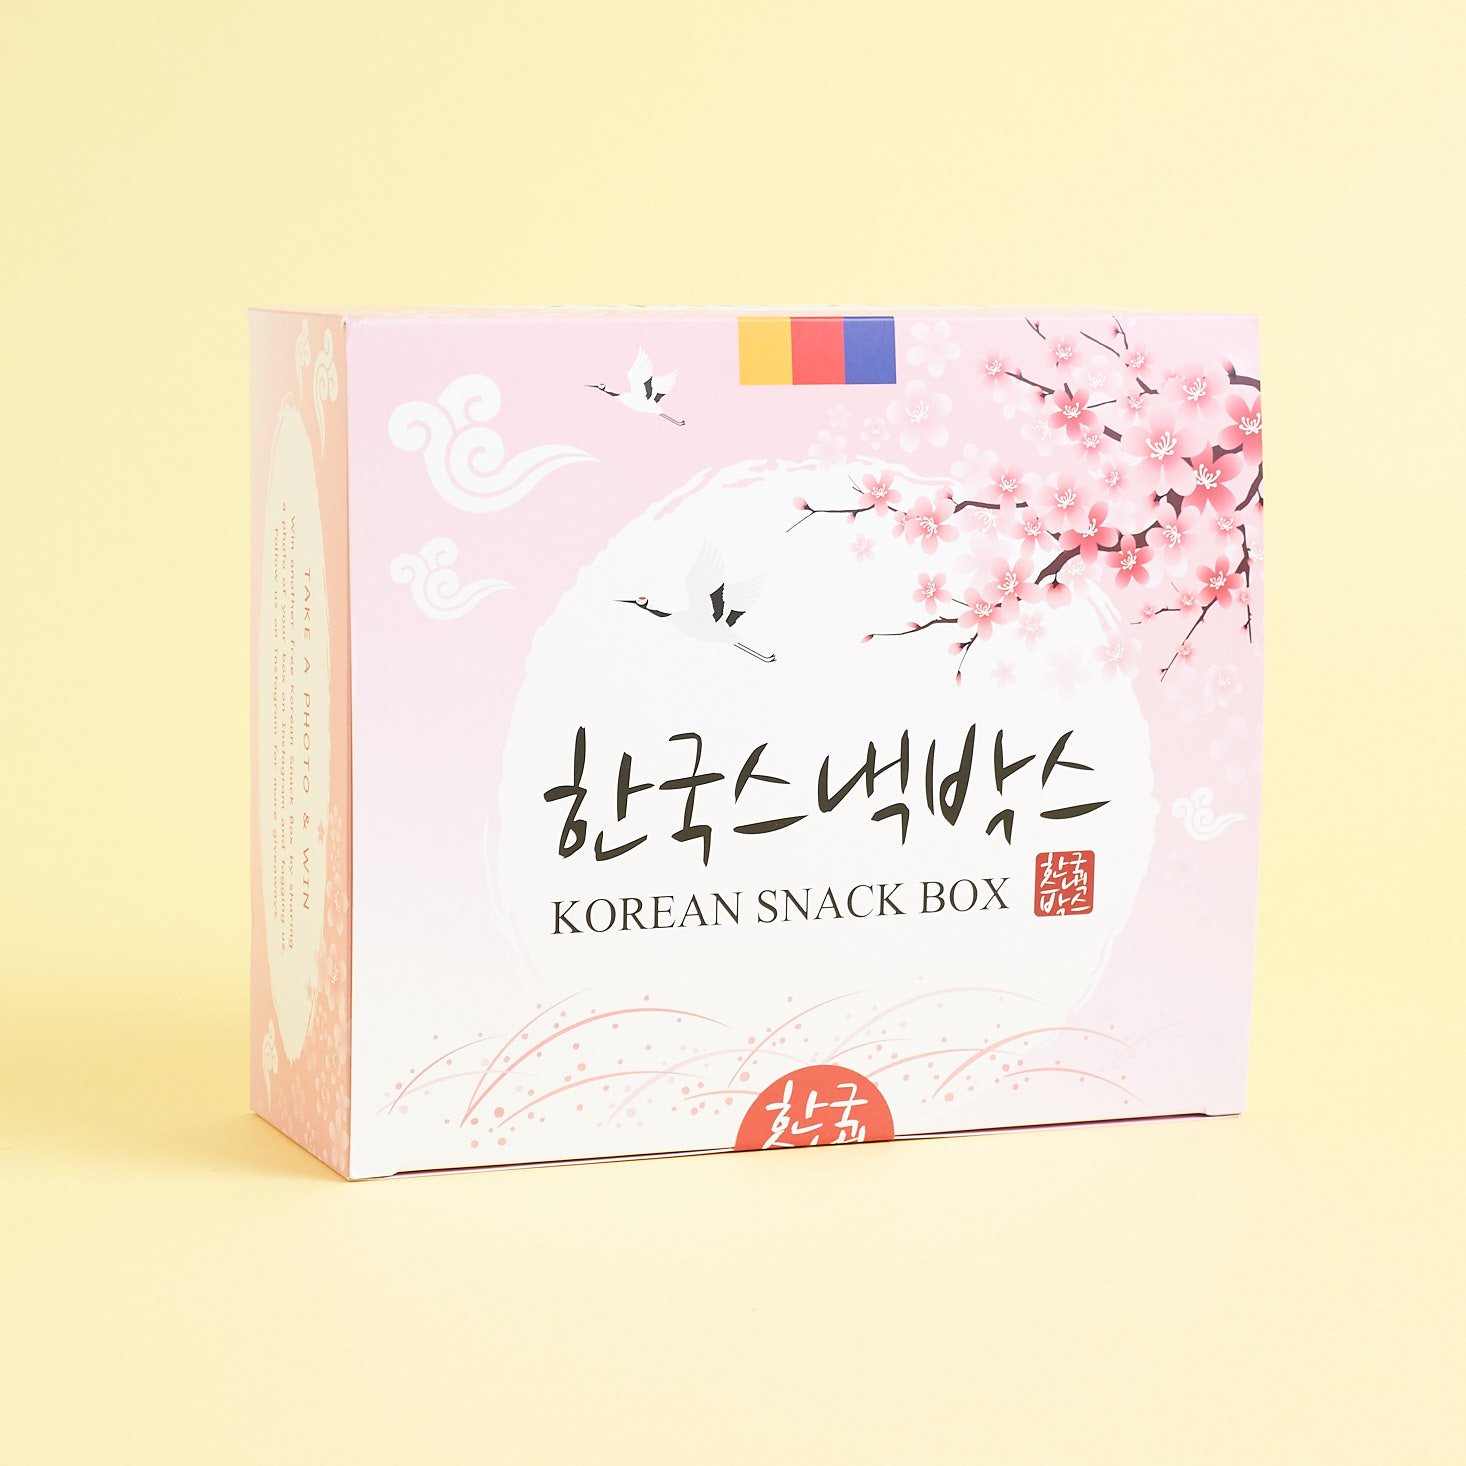 Korean Snacks Box Review + Coupon – March 2019